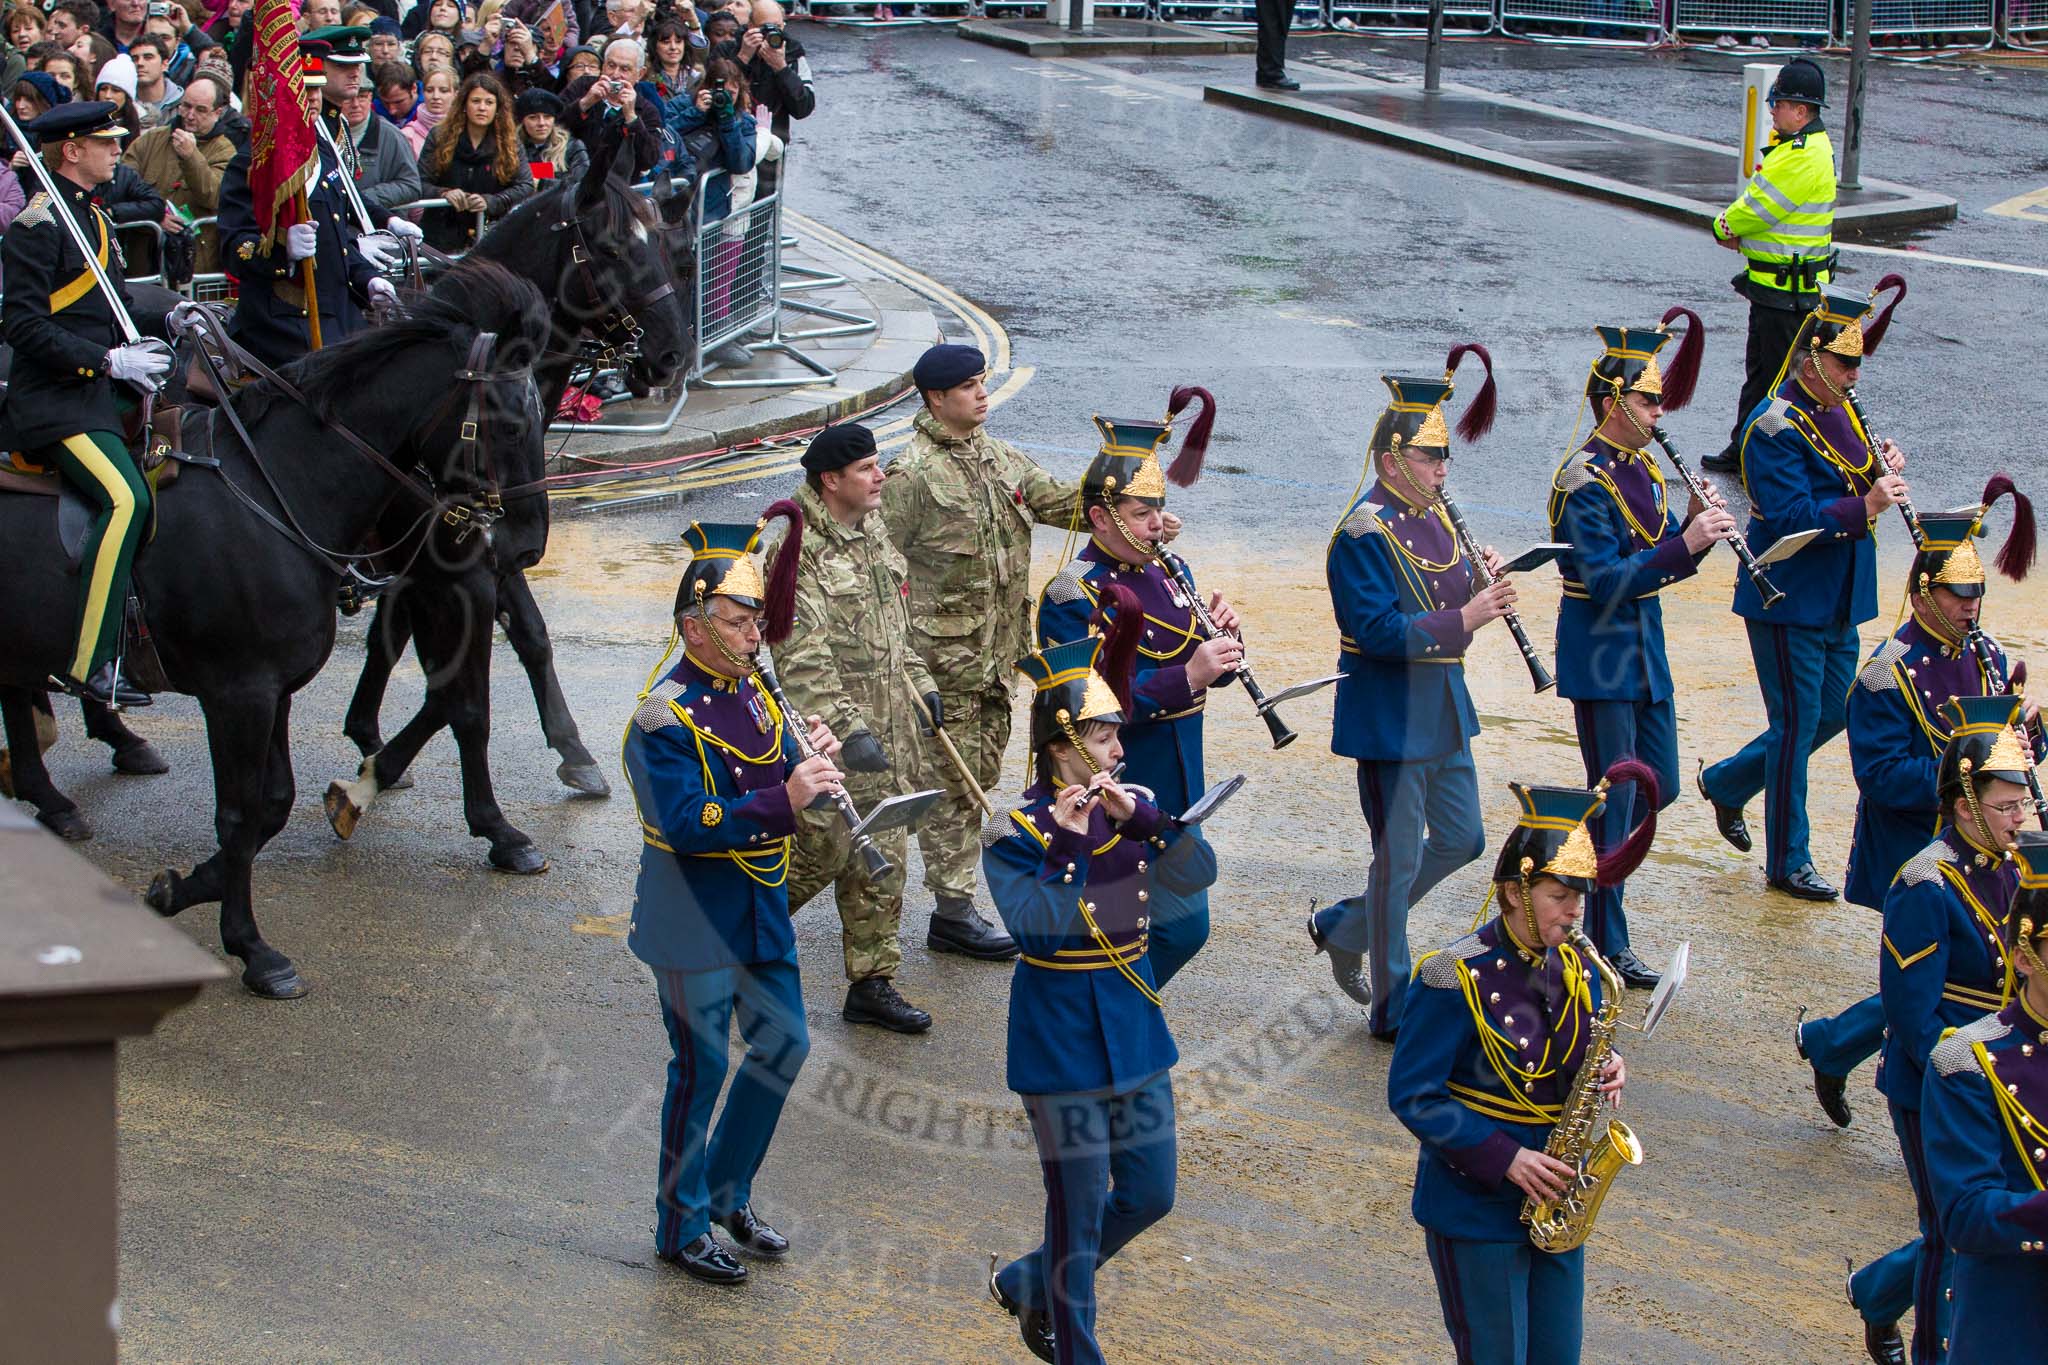 Lord Mayor's Show 2012: Entry 74 - The Band of The Royal Yeomanry (Inns of Court & City Yeomanry)..
Press stand opposite Mansion House, City of London,
London,
Greater London,
United Kingdom,
on 10 November 2012 at 11:32, image #931